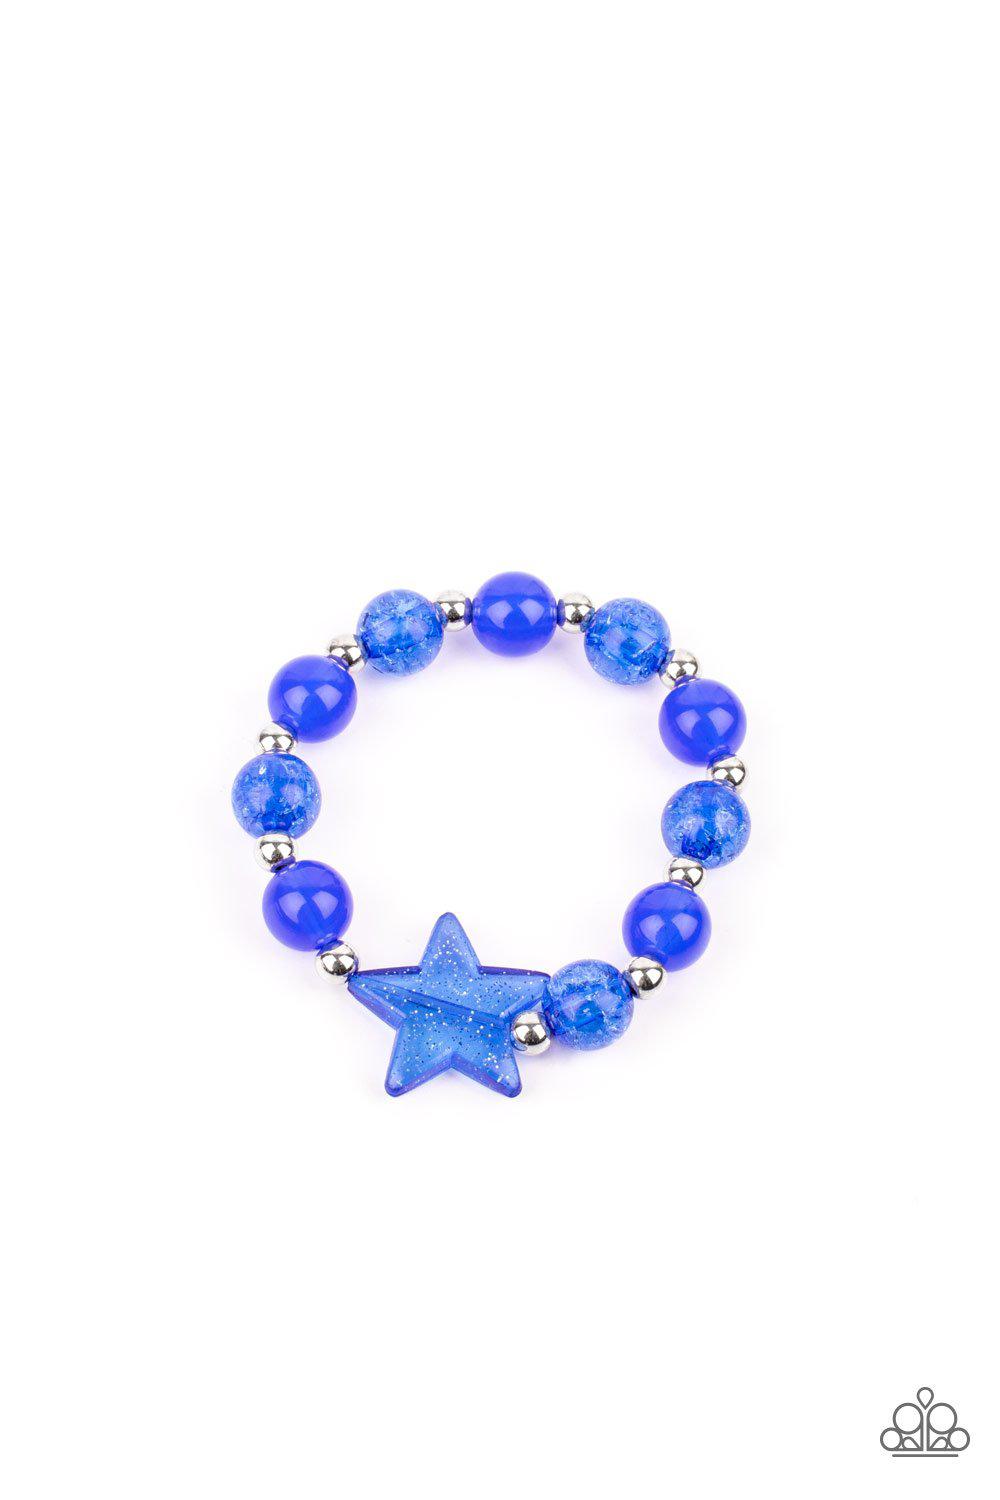 Starlet Shimmer Children&#39;s Red, White and Blue Star Bracelets - Paparazzi Accessories (set of 5)- lightbox - CarasShop.com - $5 Jewelry by Cara Jewels